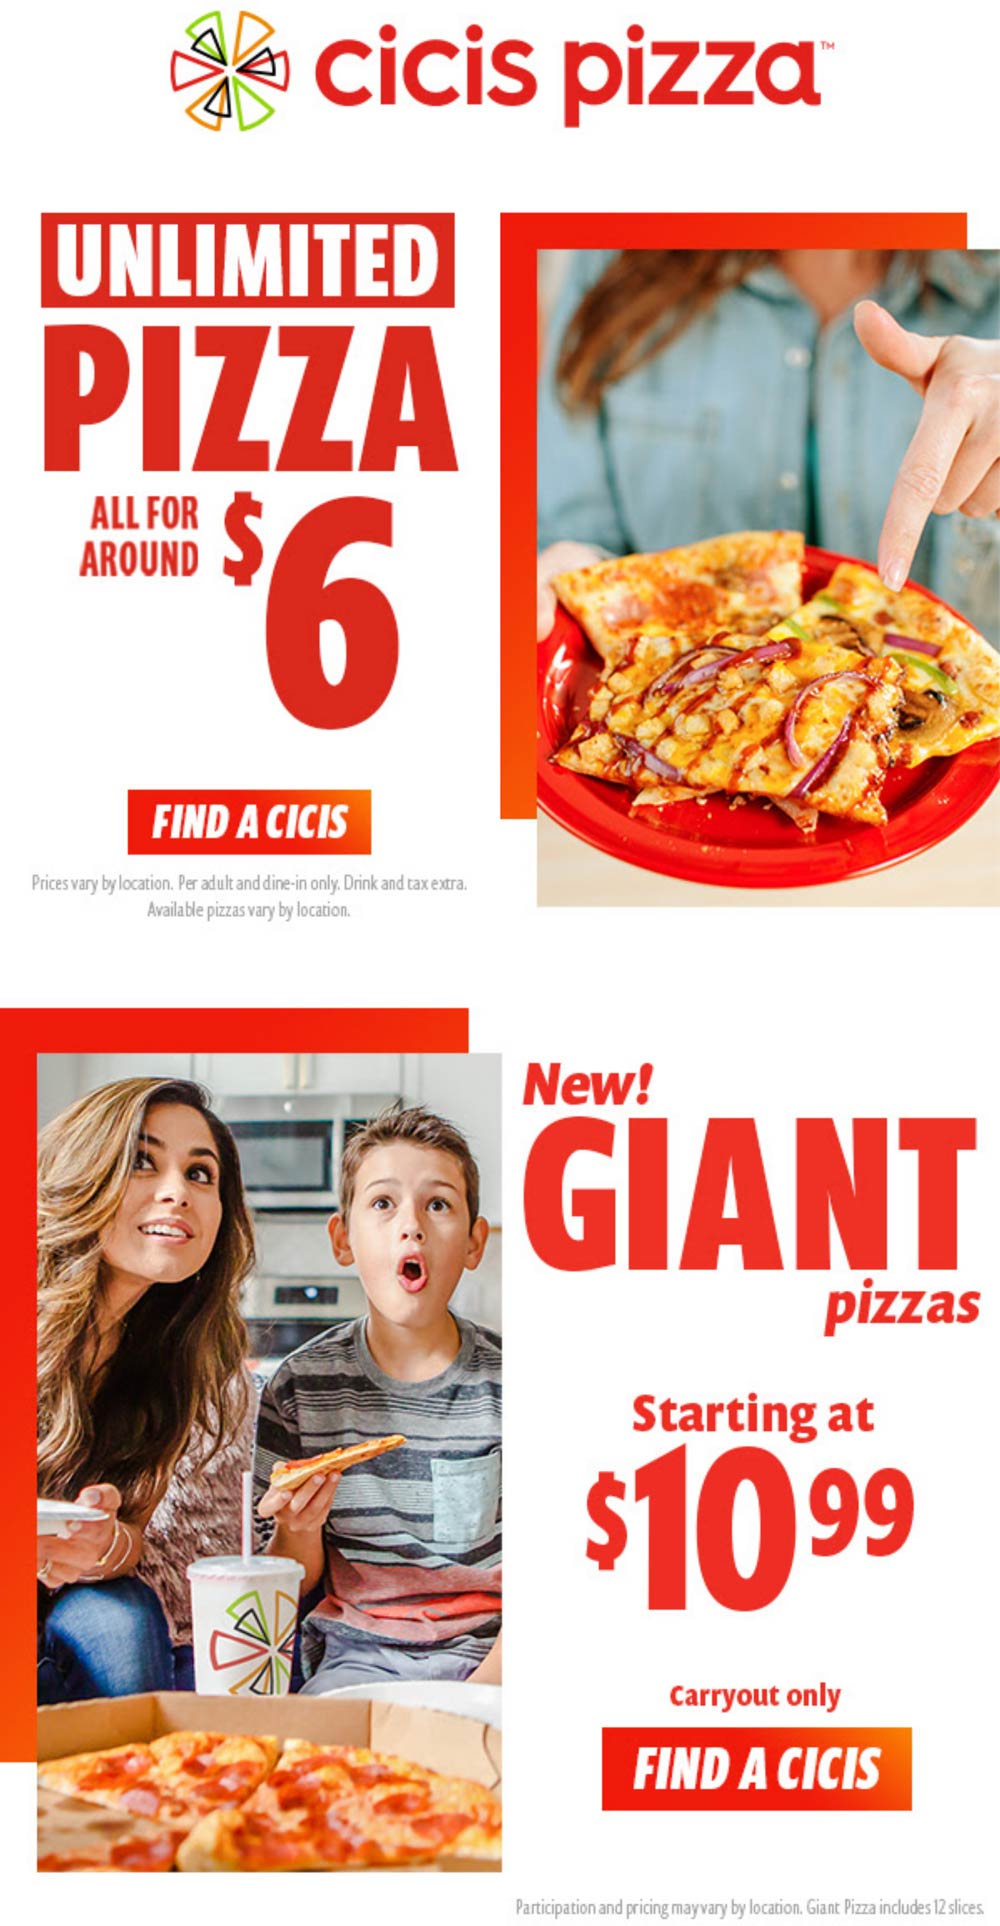 Cicis Pizza restaurants Coupon  Dine-in on $6 bottomless pizzas at Cicis Pizza #cicispizza 